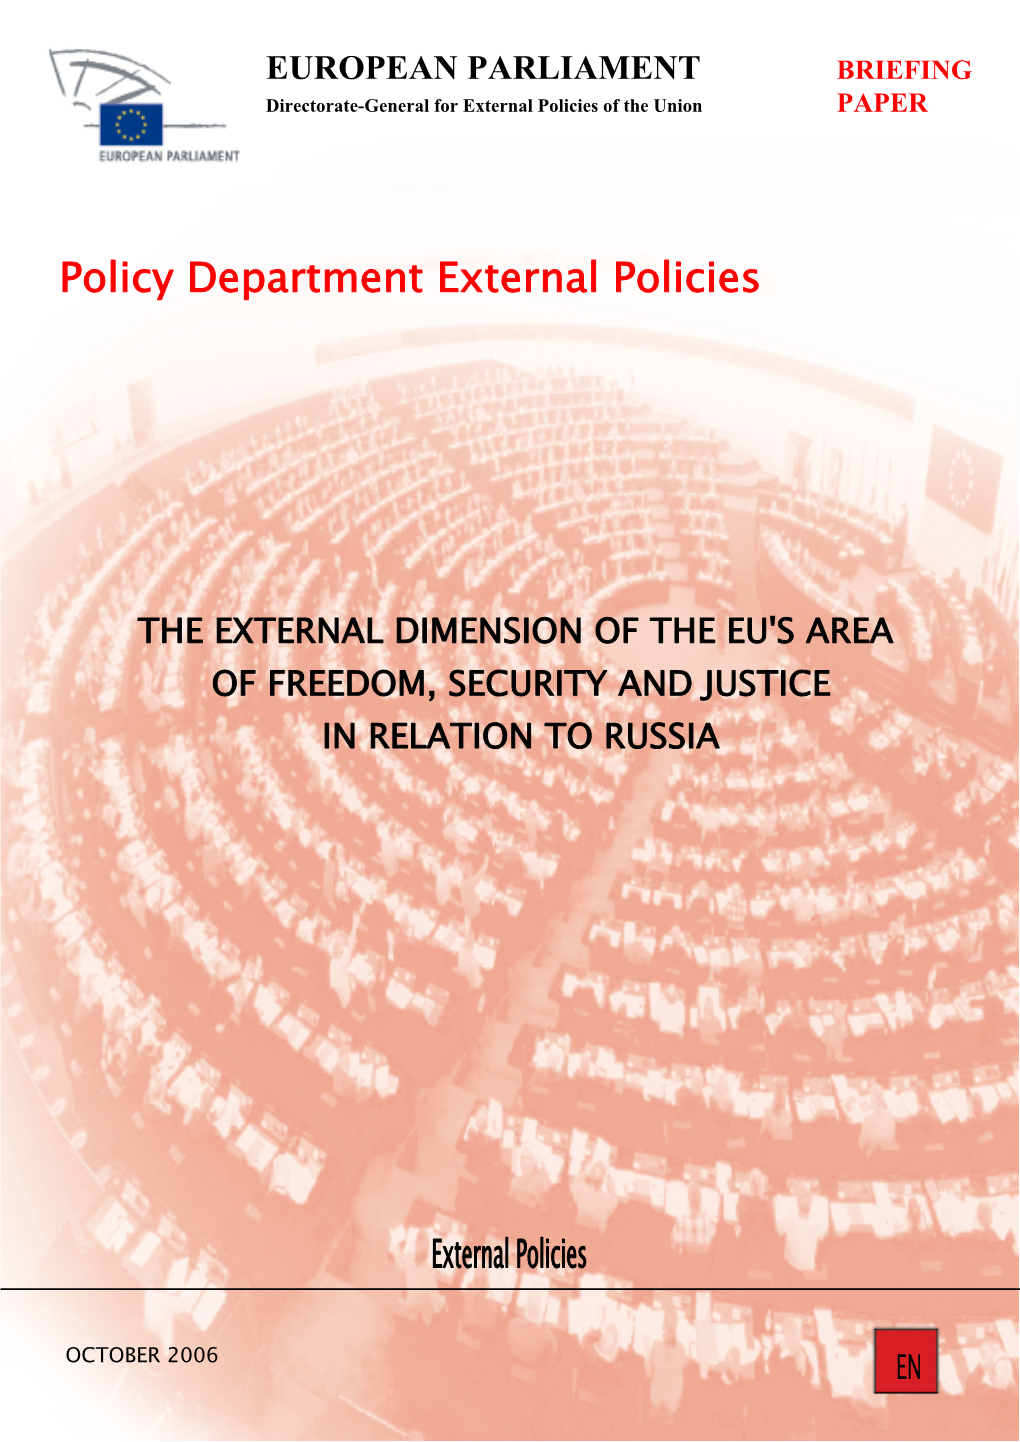 The External Dimension of the Eu's Area of Freedom, Security and Justice in Relation to Russia